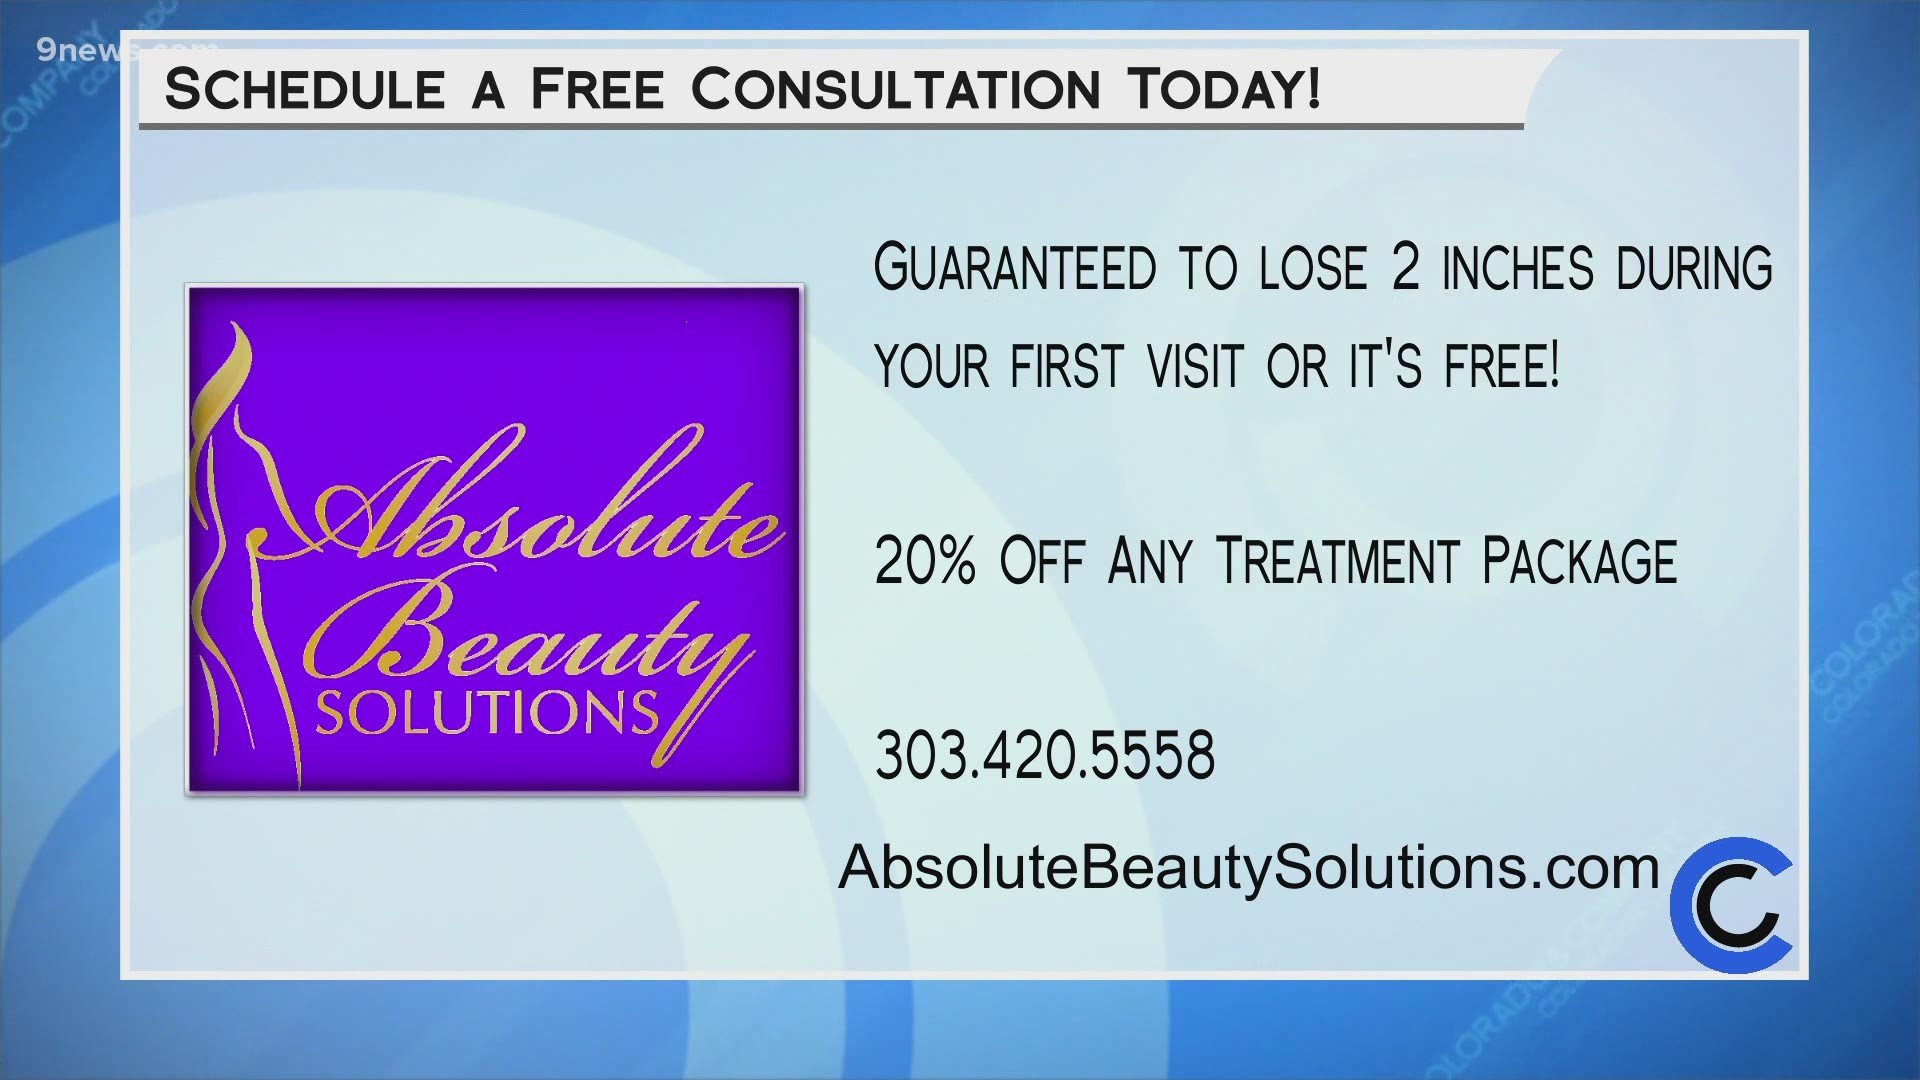 Lose two inches with ultra slim during your first visit or its free! Visit AbsoluteBeautySolutions.com or call 303.420.5558 to learn more and get started.